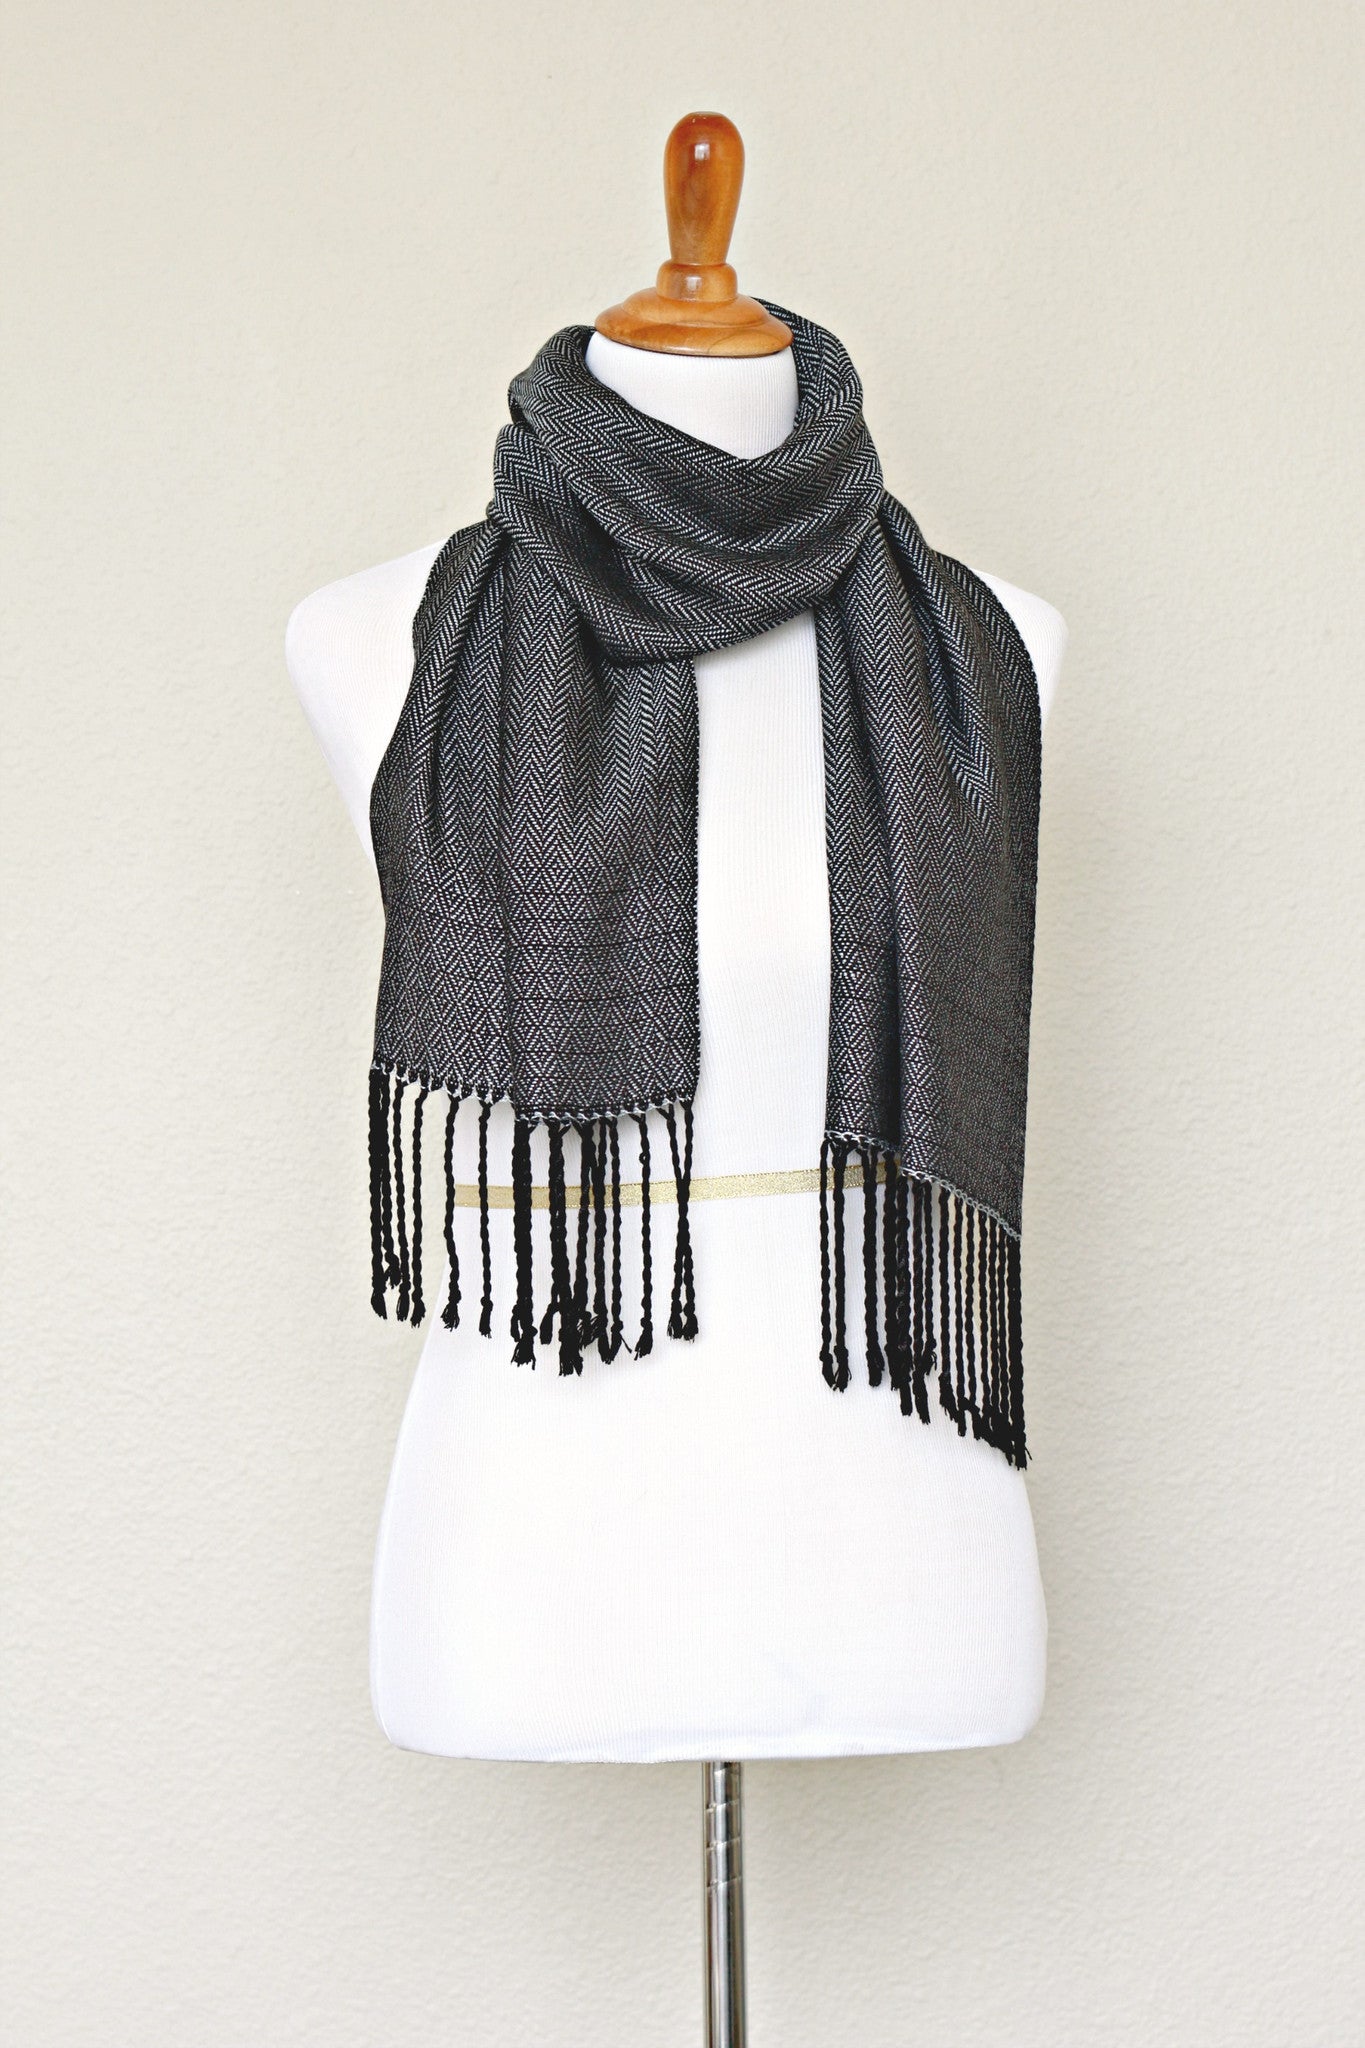 Woven scarf in silver color with twill pattern, long scarf with fringe